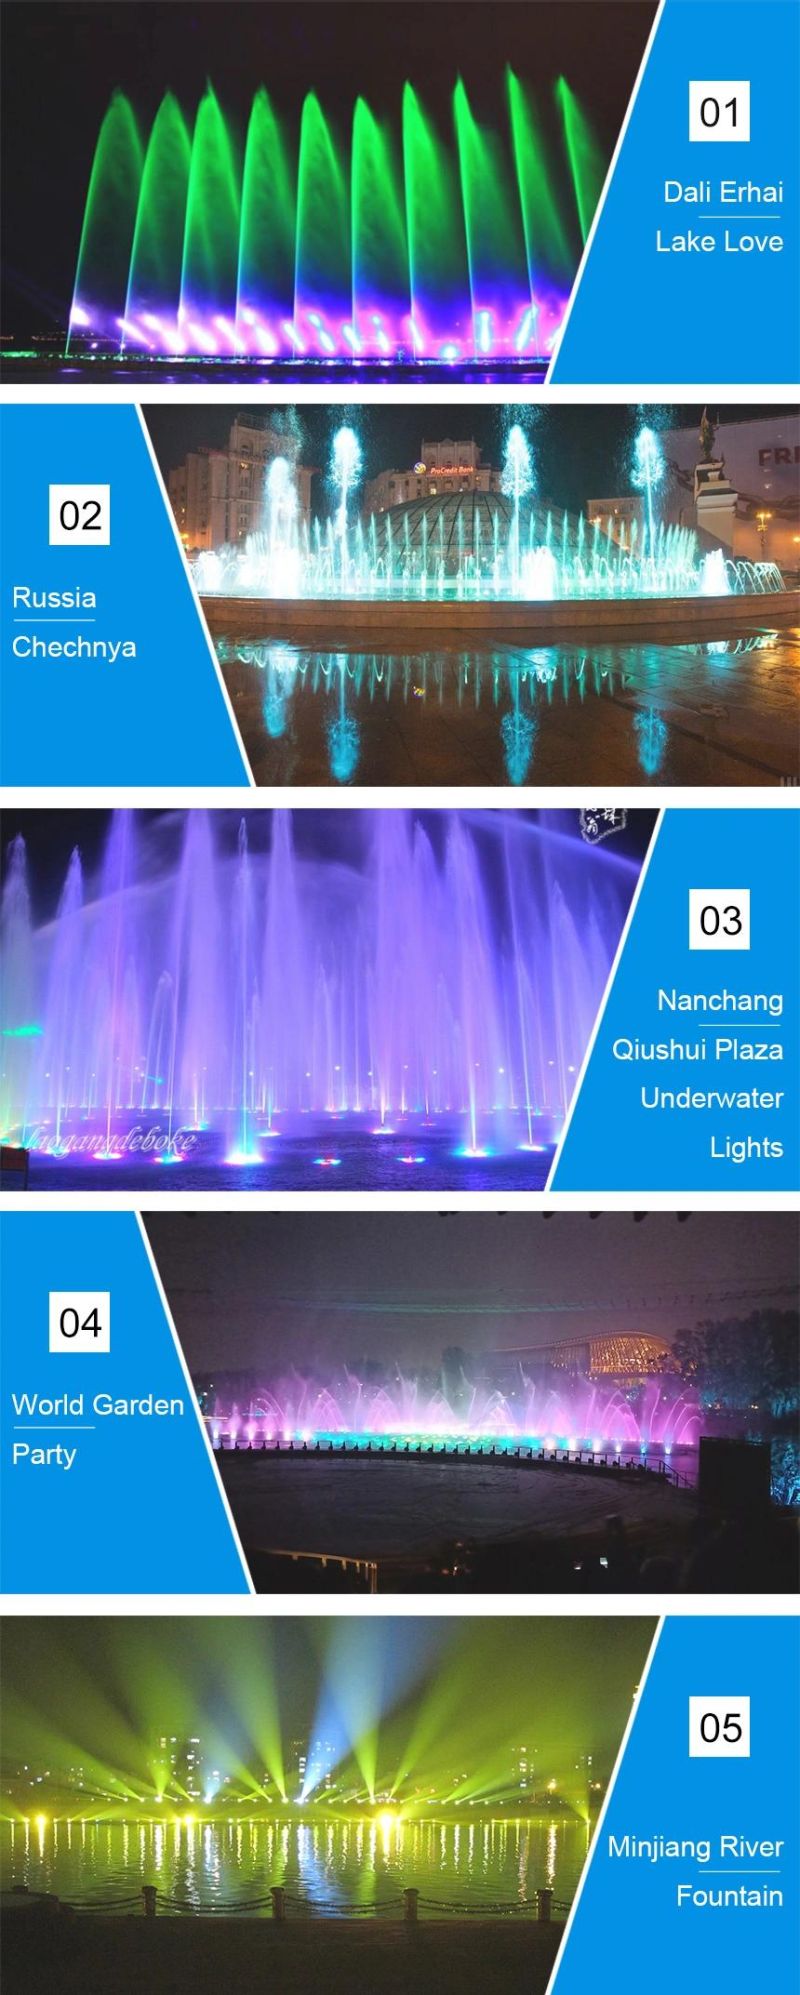 Waterproof IP68 Outdoor DC 12V 24V Remote Control Water Pump 18W RGB Submersible Garden RGBW LED Fountain Dancing Spot Lighting Swimming Pool Lamp Light